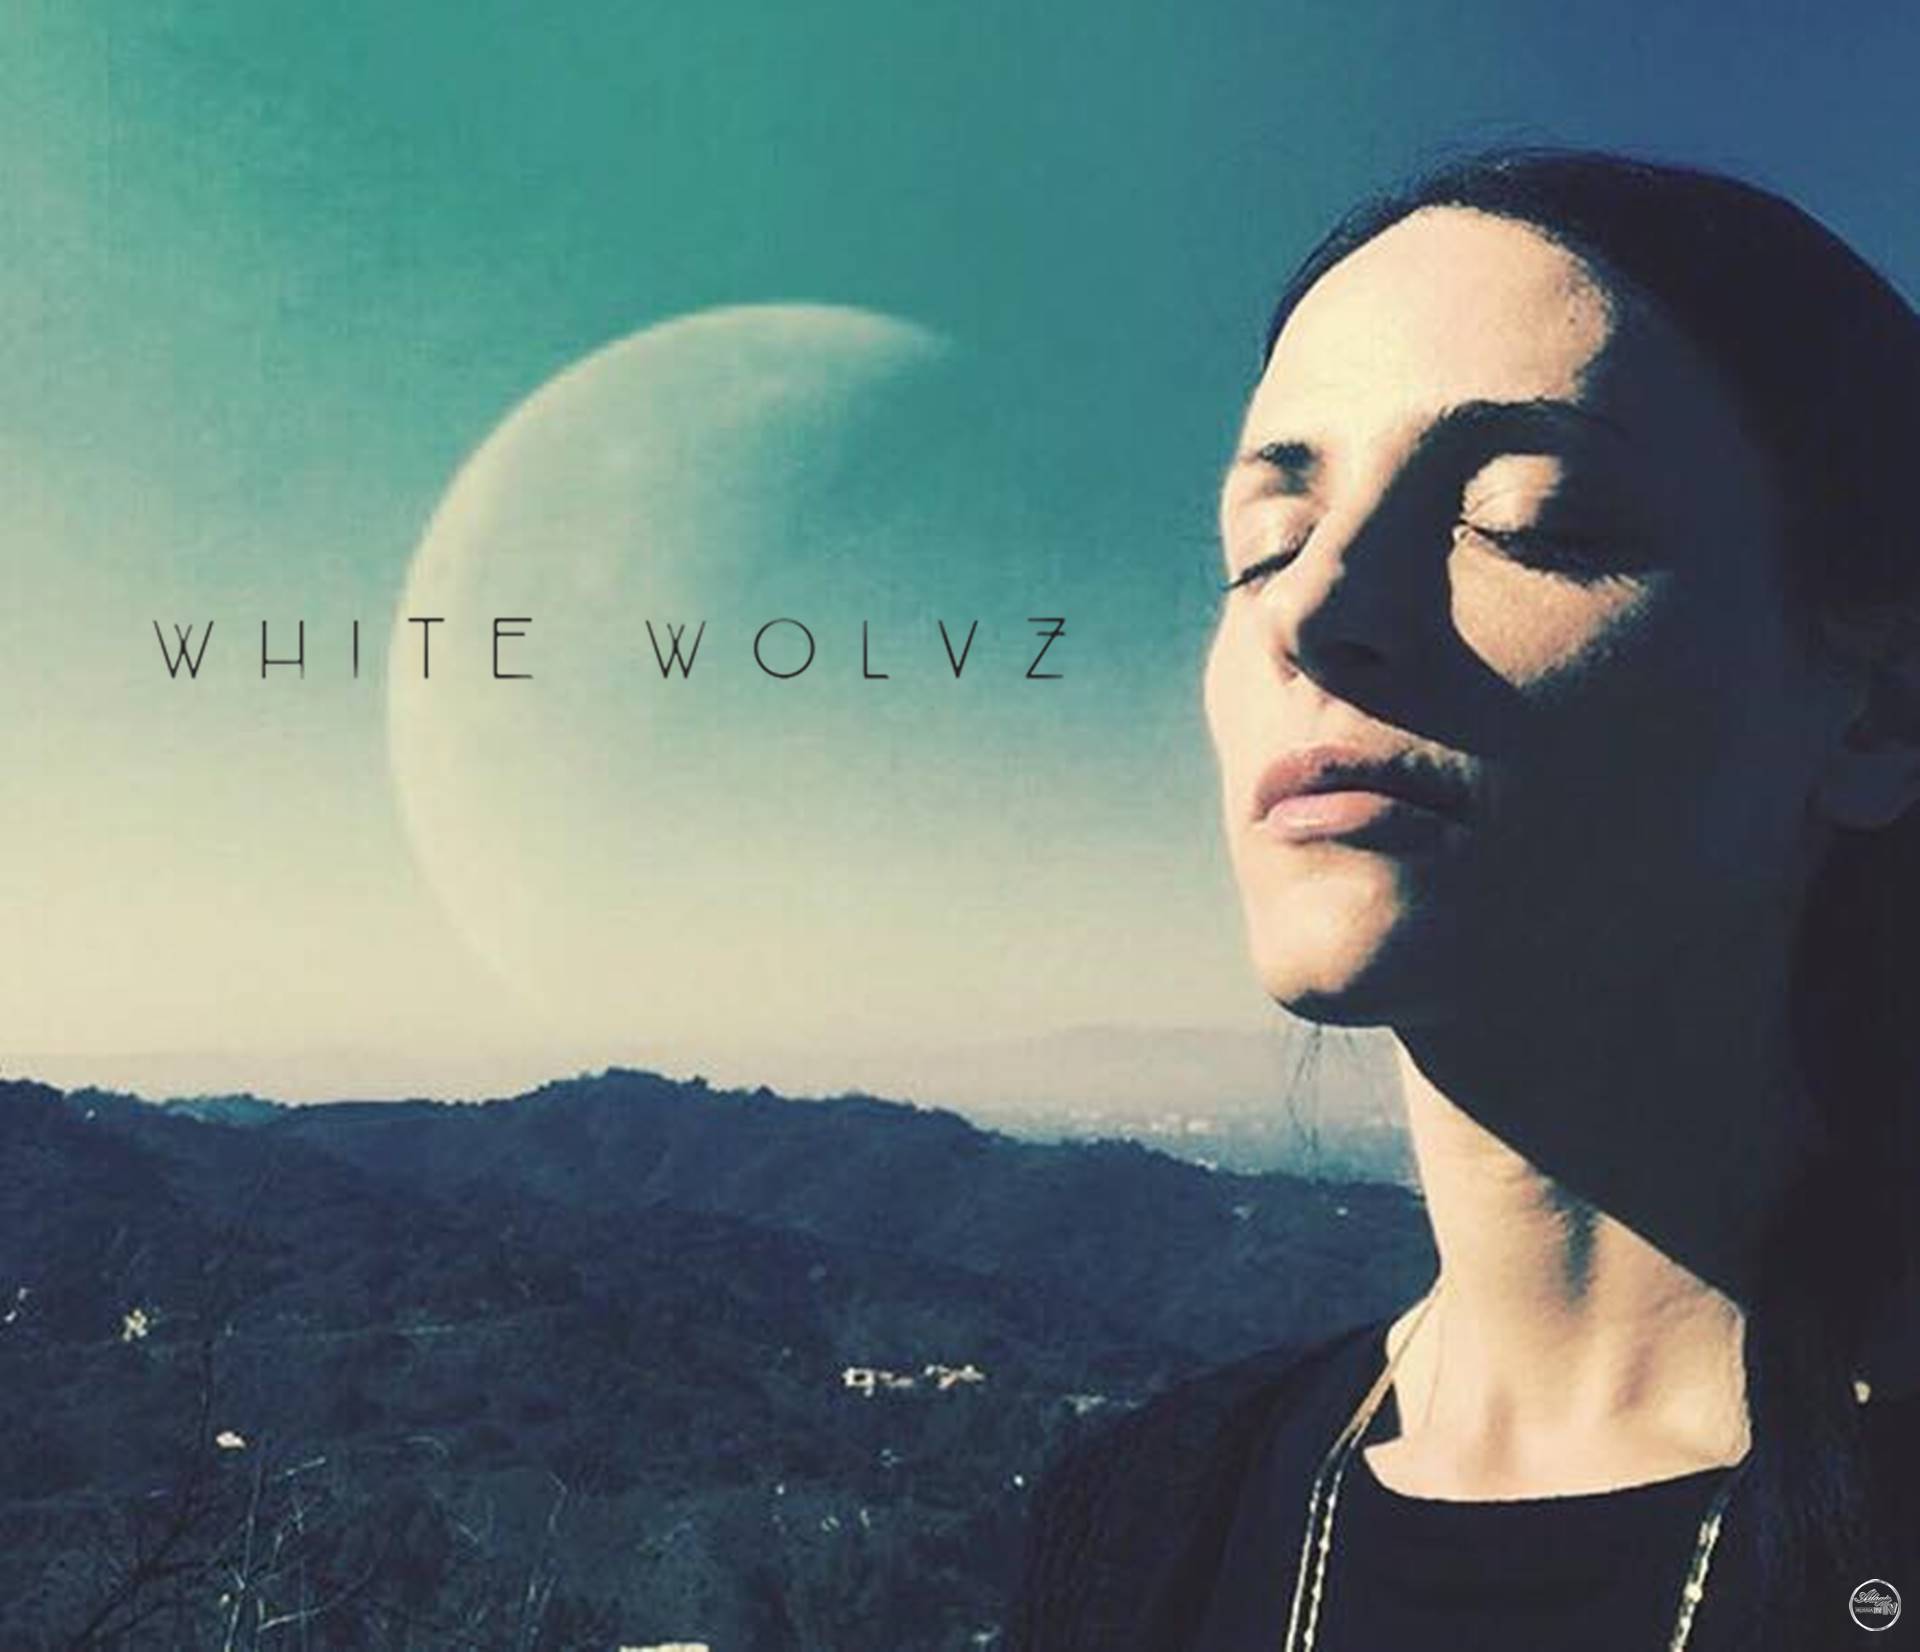 White Wolvz